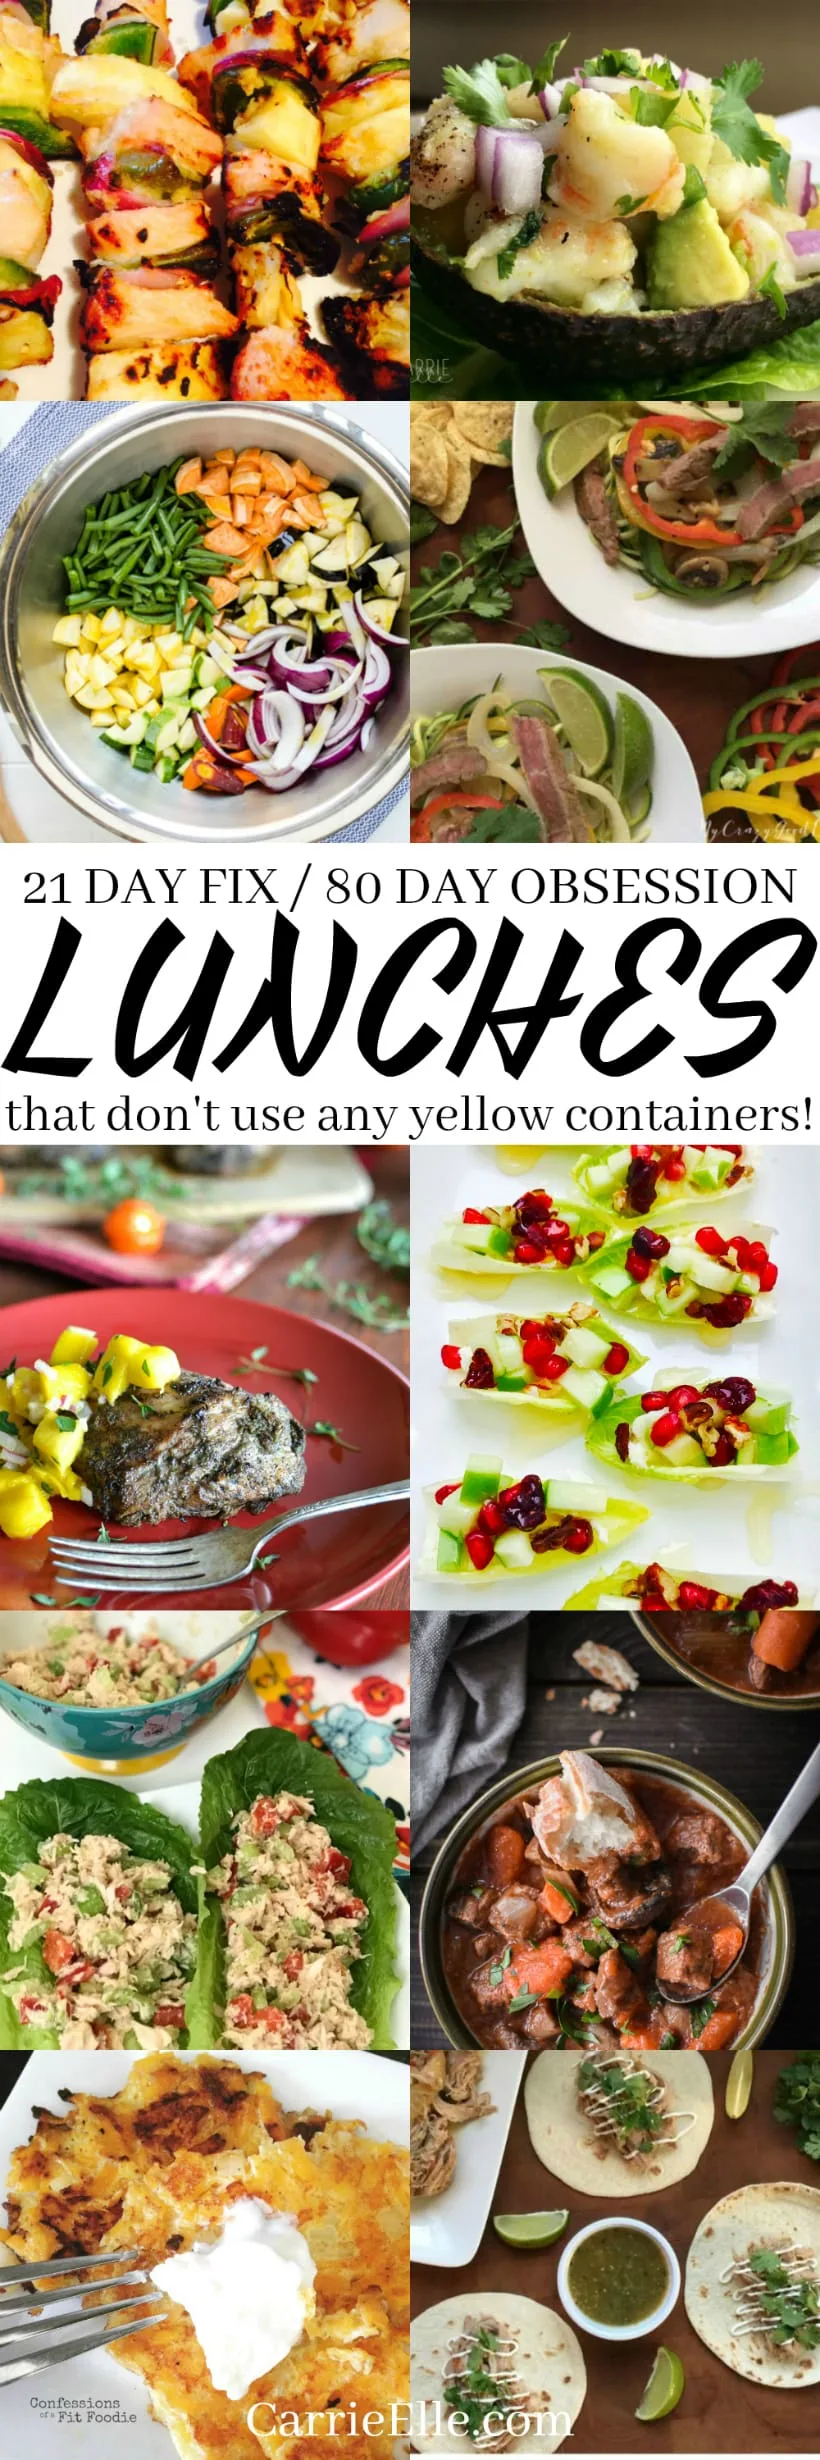 21 Day Fix No Yellows Lunches